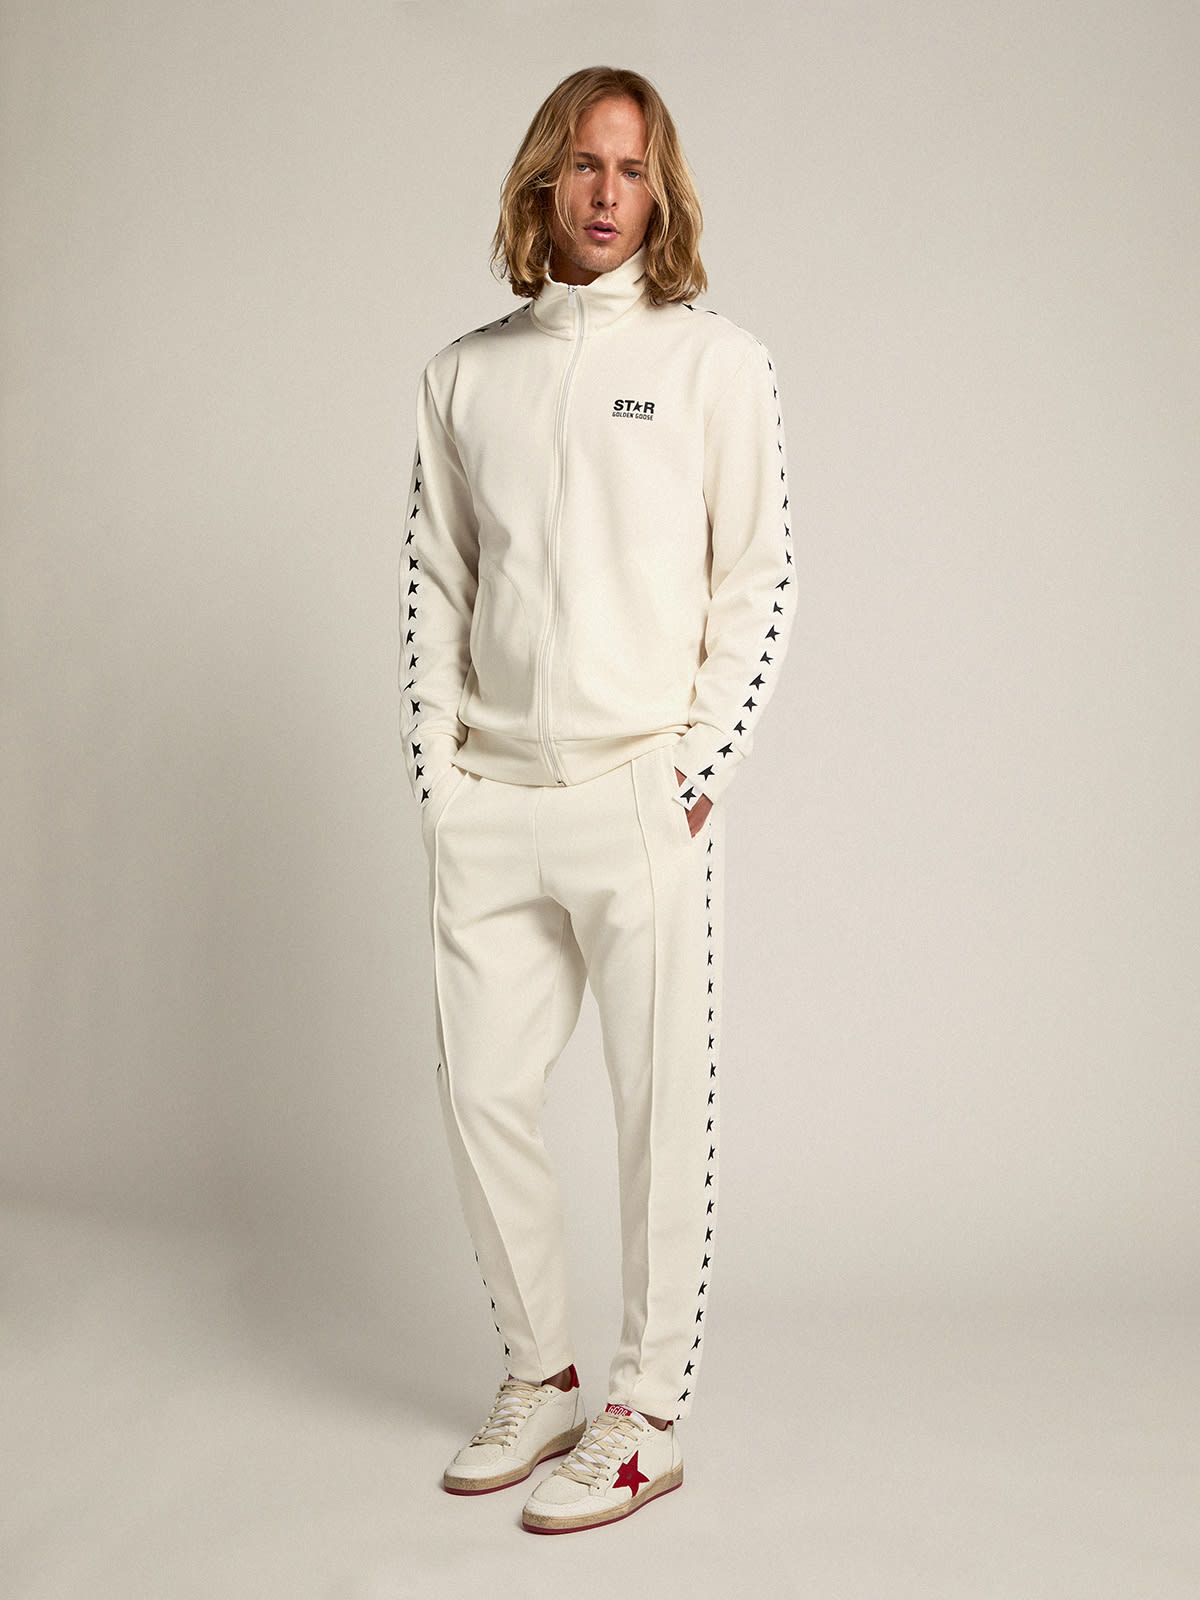 Golden Goose - Men’s white zipped sweatshirt with white strip and black stars in 